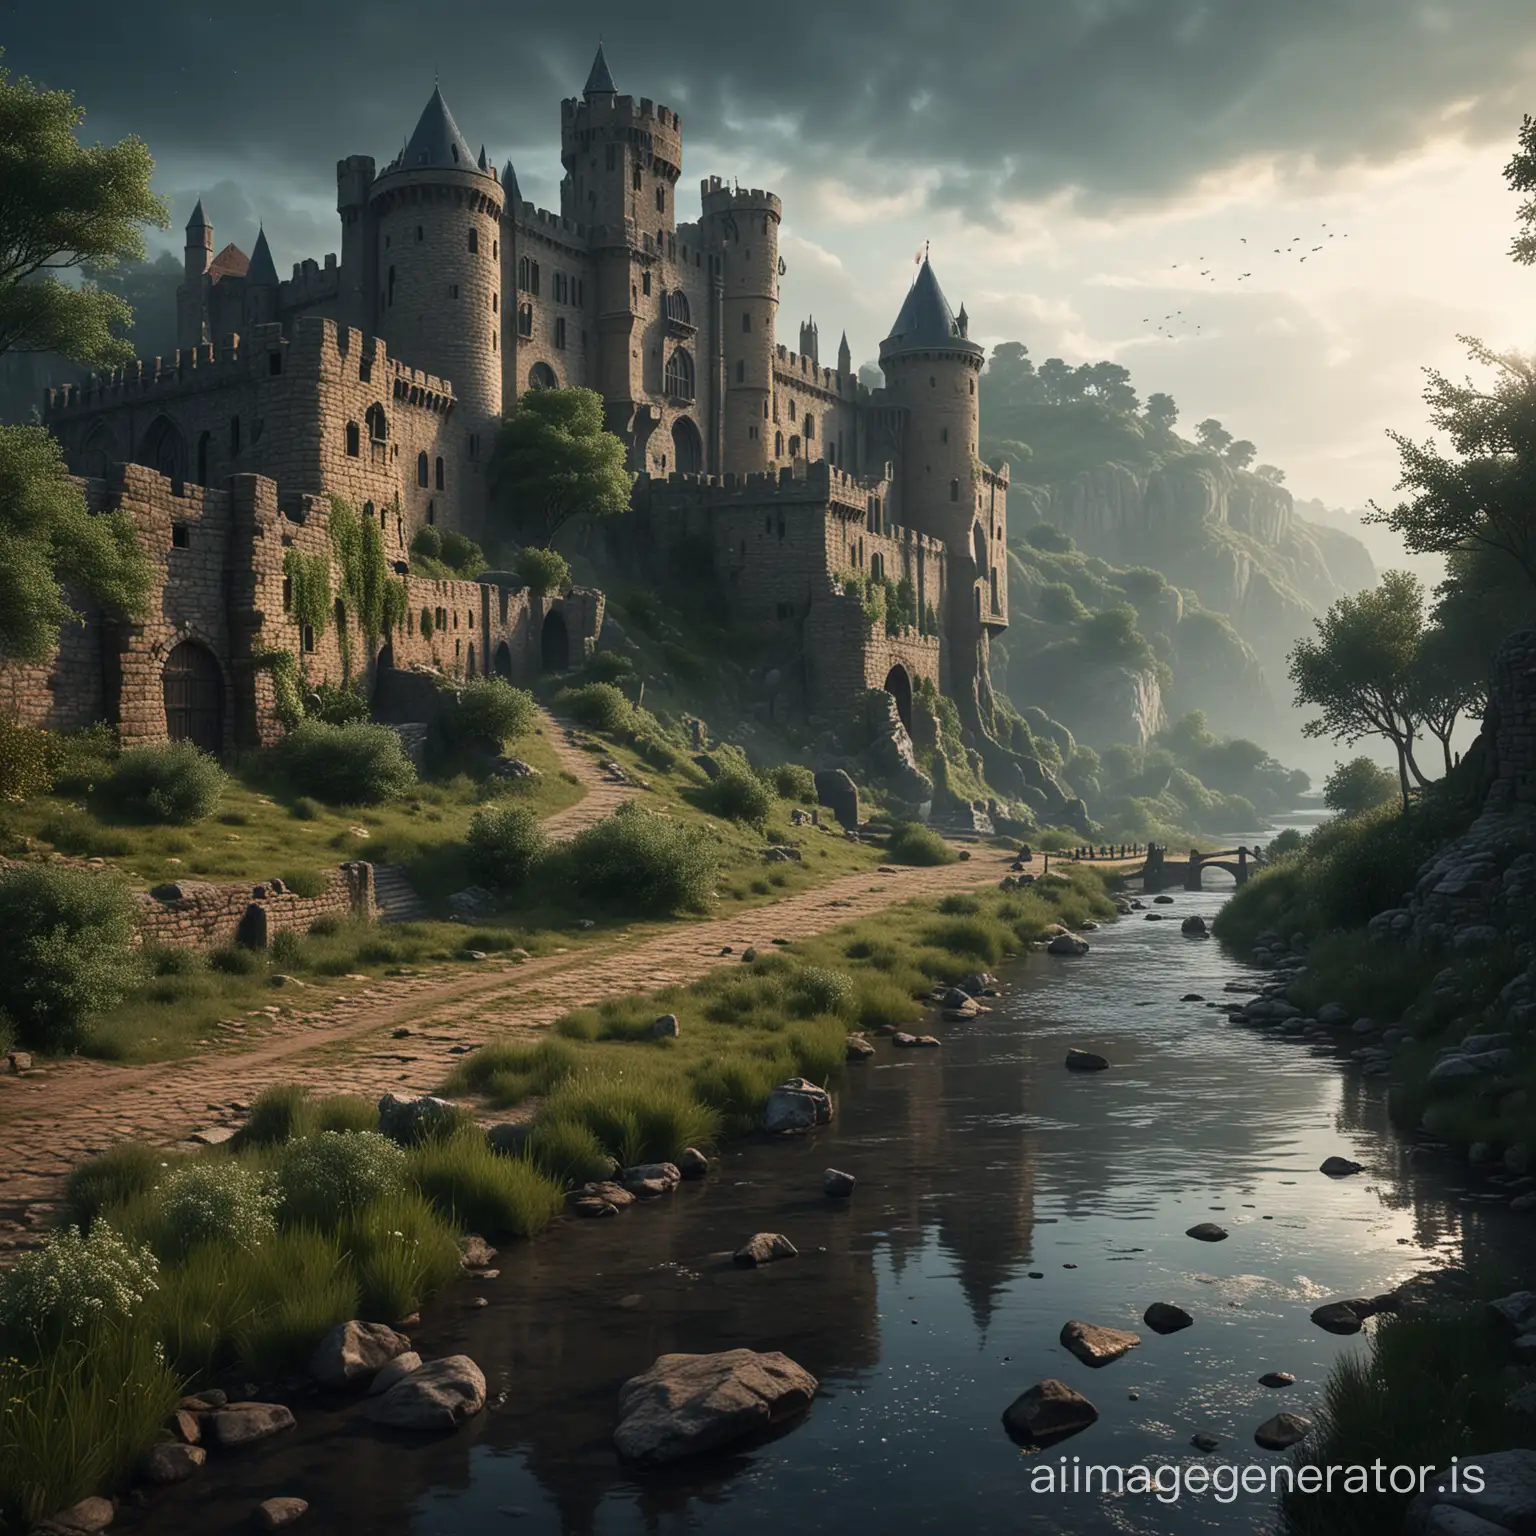 Subject: old mystical King Arthur's Castle of Camelot
Setting: castle in ruins on a hill with very old bricks and tall round towers and doors
Added Details: a small river in the foreground,
 nature with bushes and a forest of trees on the side,
 at night with a dark blue sky,
 some stars, 
 some fog above the river,
 a natural pathway made of stones covered with grass
Tone: Warm, Naturalistic
Theme: Adventure
Style: Realism
Genre: Historical, Gothic
Atmosphere: Medieval
Perspective: Bird’s Eye View
Composition: Central, Layered
Detailing: Elaborate, Realistic, Textured
Lighting: Natural, Warm, buildings illuminated by lights from the inside
Technical Aspects: 3D Rendering, Matte Painting